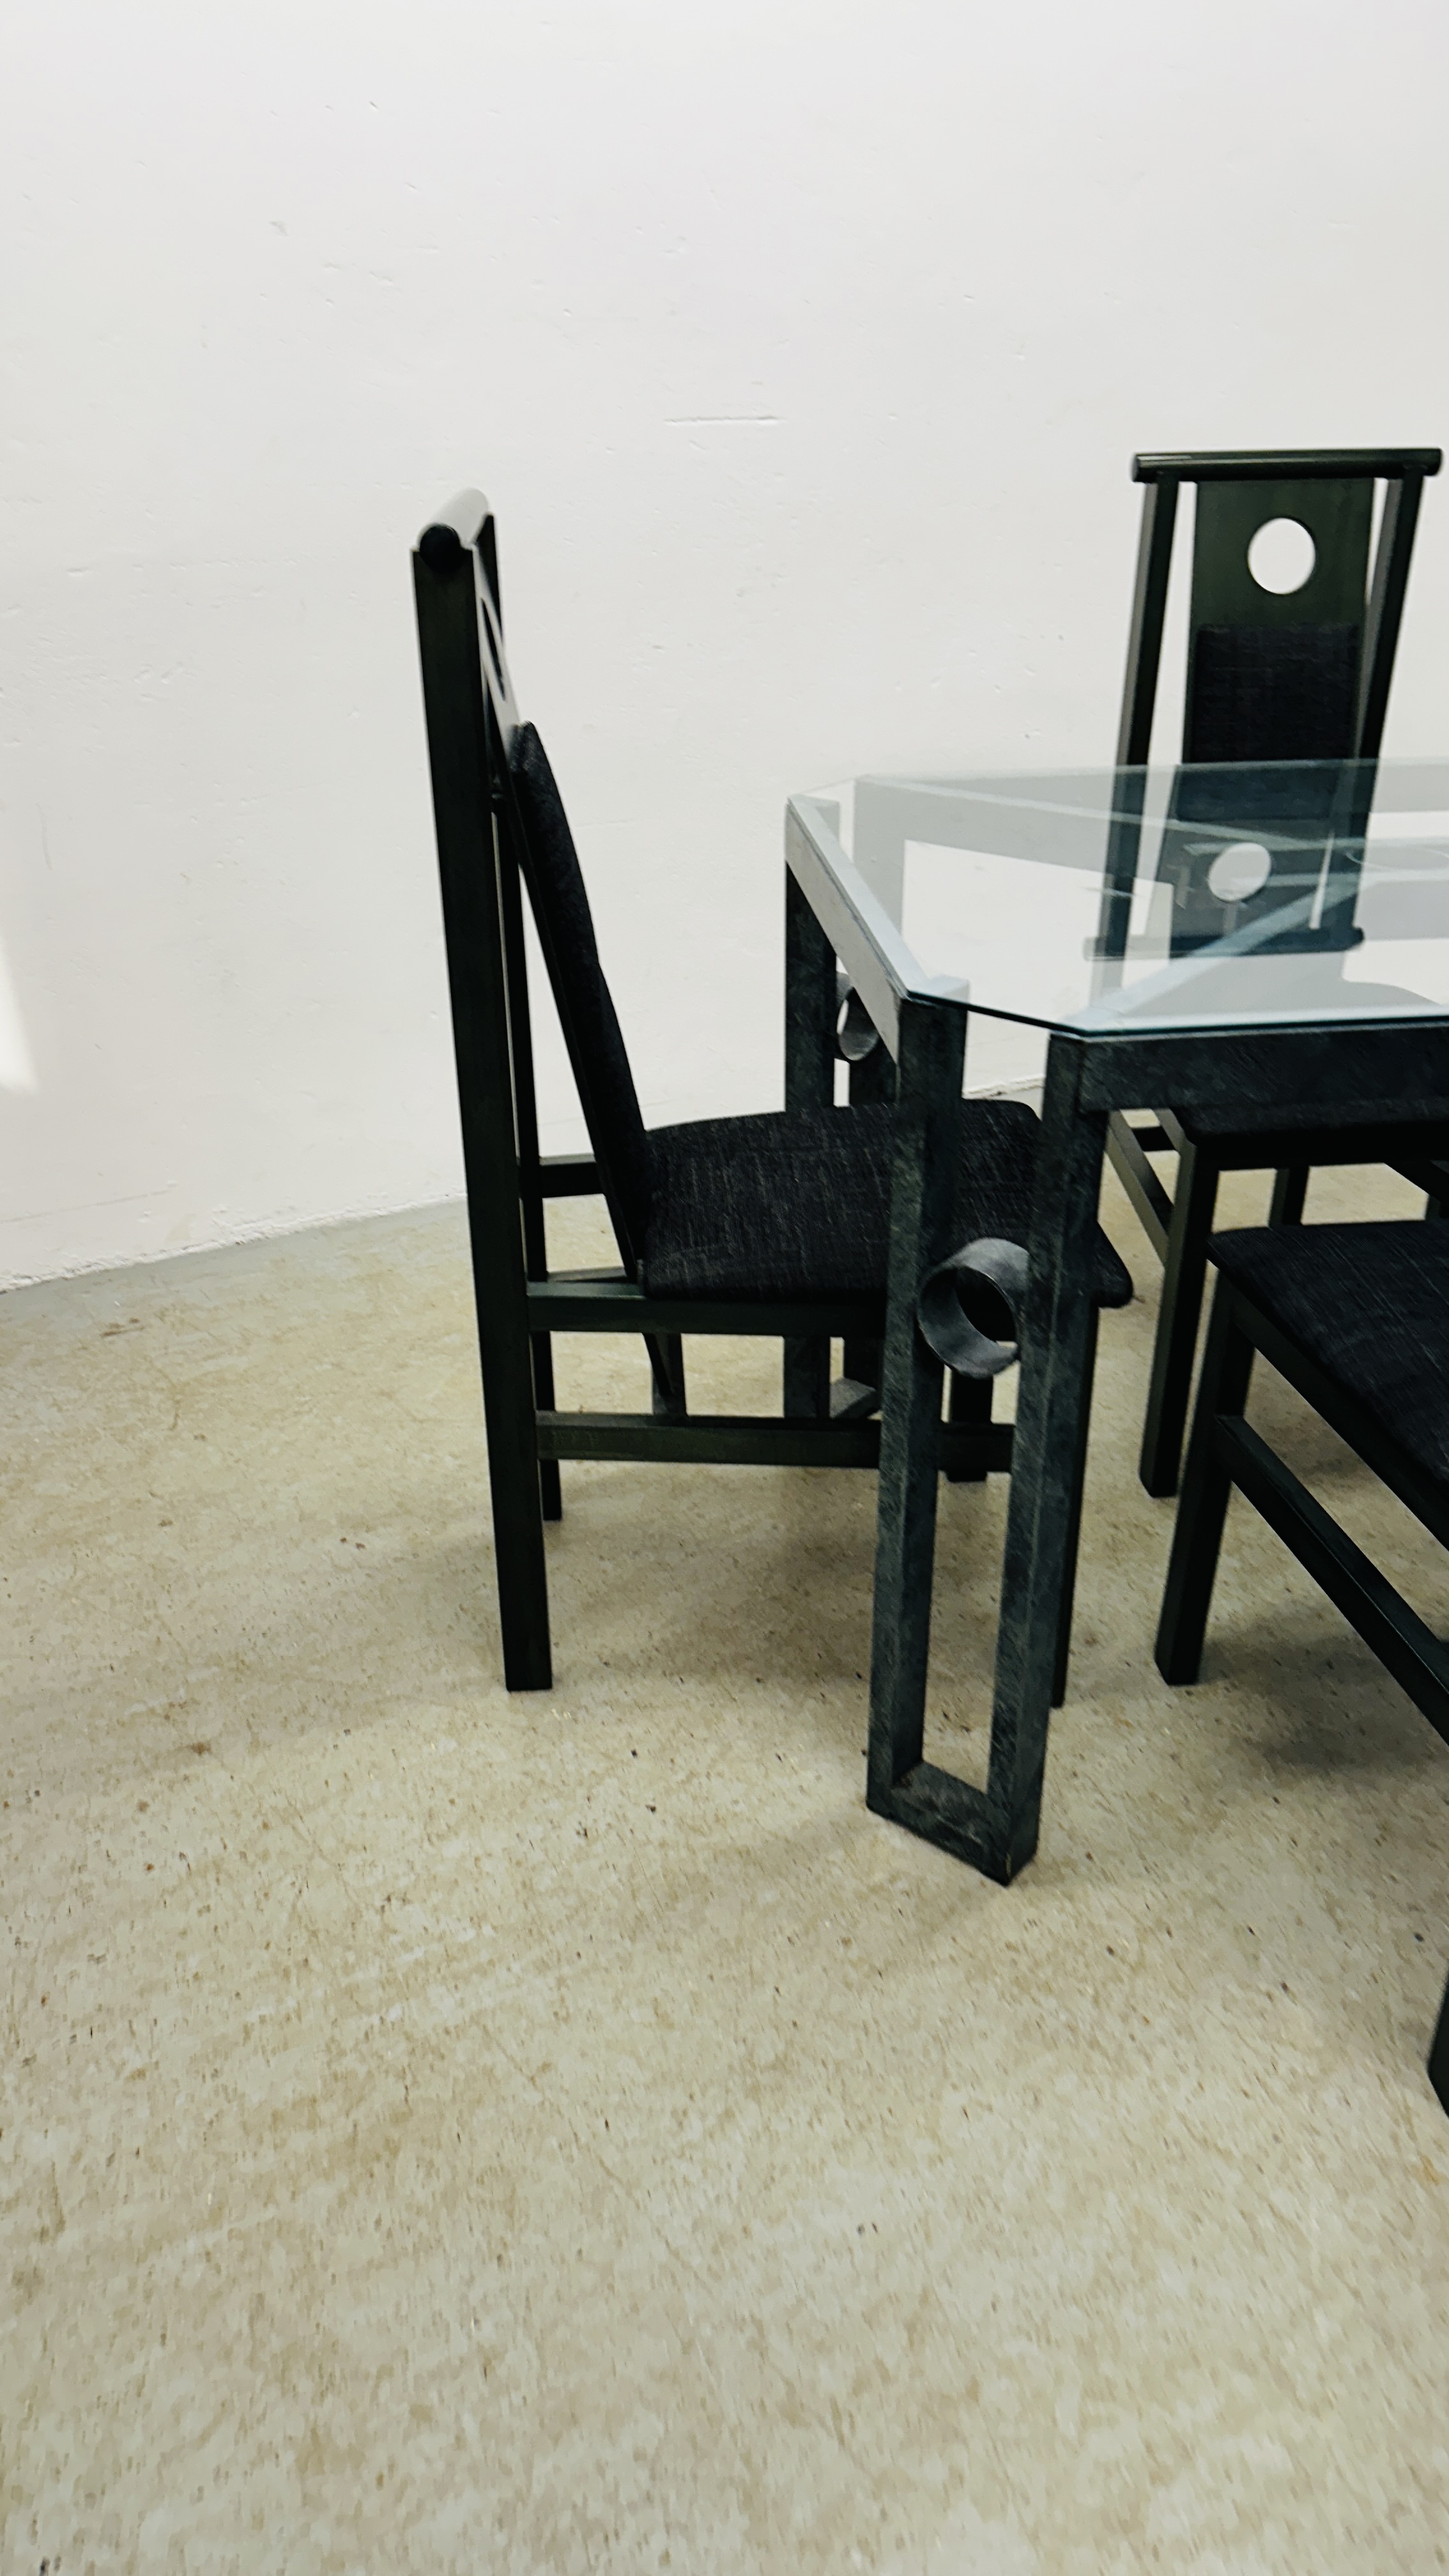 A DESIGNER MODERN METAL CRAFT DINING TABLE WITH GLASS TOP 155CM X 80CM ACCOMPANIED BY A SET OF SIX - Image 2 of 14